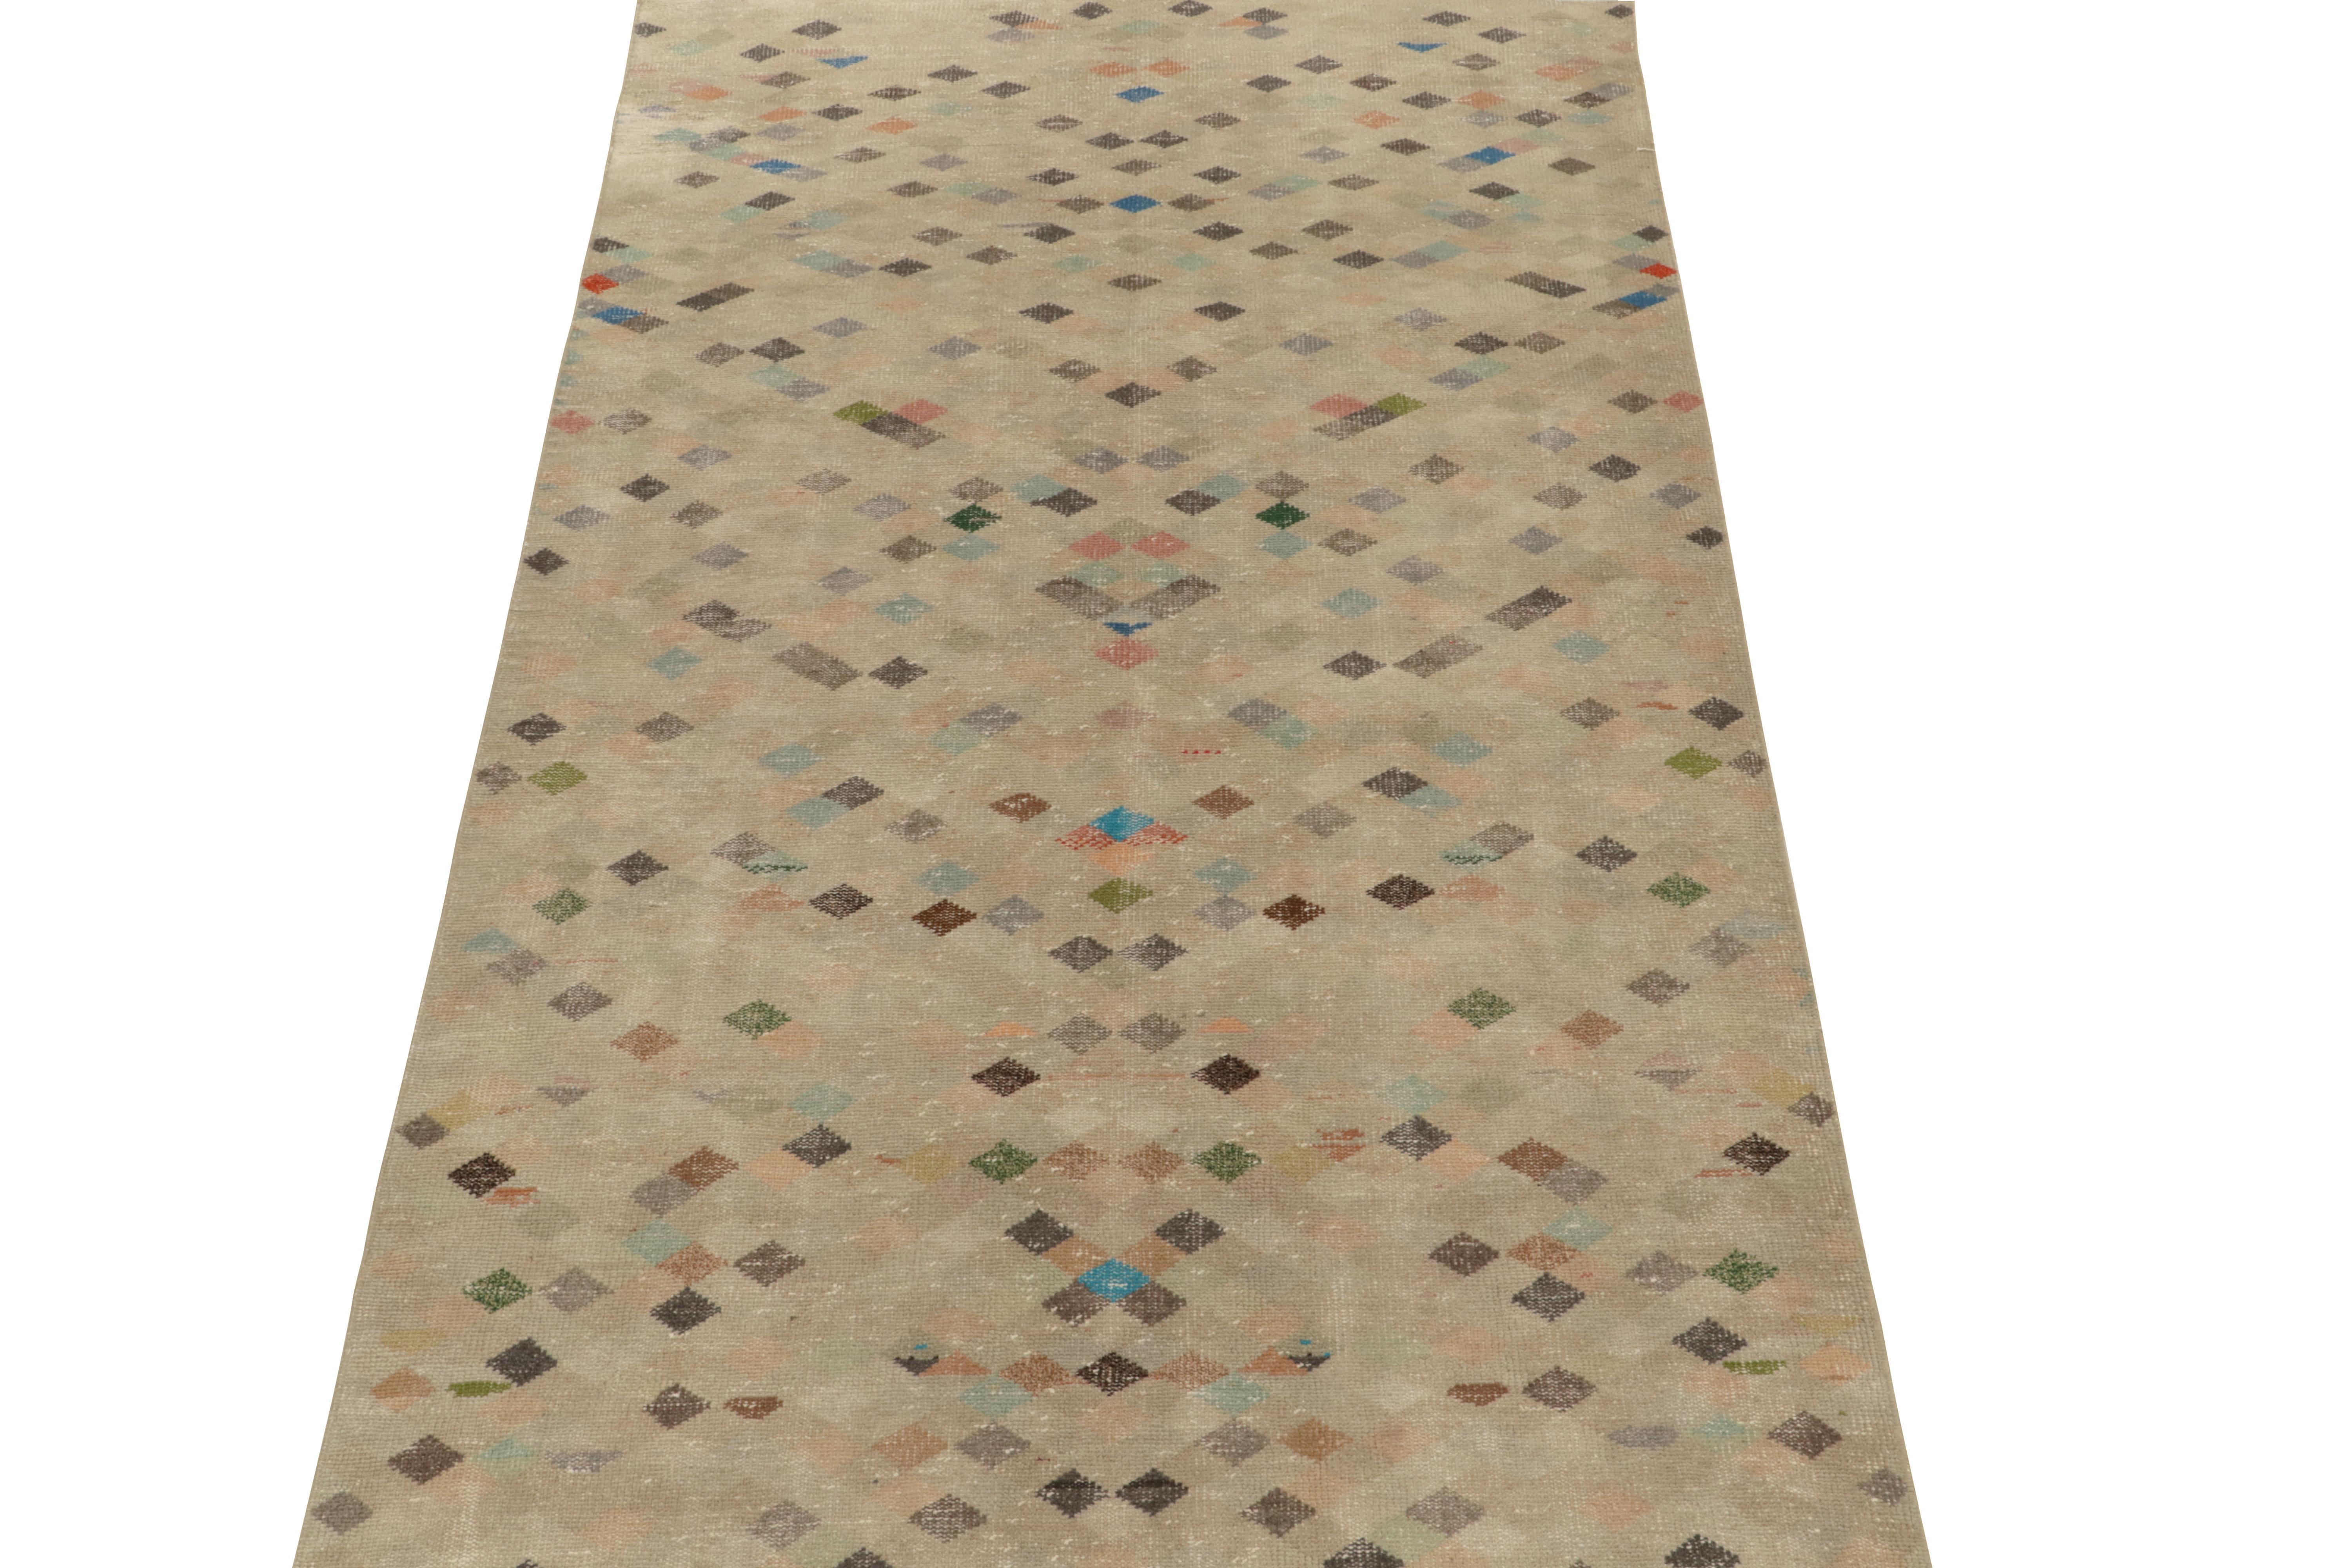 Hand-knotted in wool, a 5x9 vintage rug from a soulful Turkish atelier, entering Rug & Kilim’s commemorative Mid-Century Pasha Collection. 

This dedicated piece enjoys a sublime geometric pattern alternating with greige, blue, brown and black